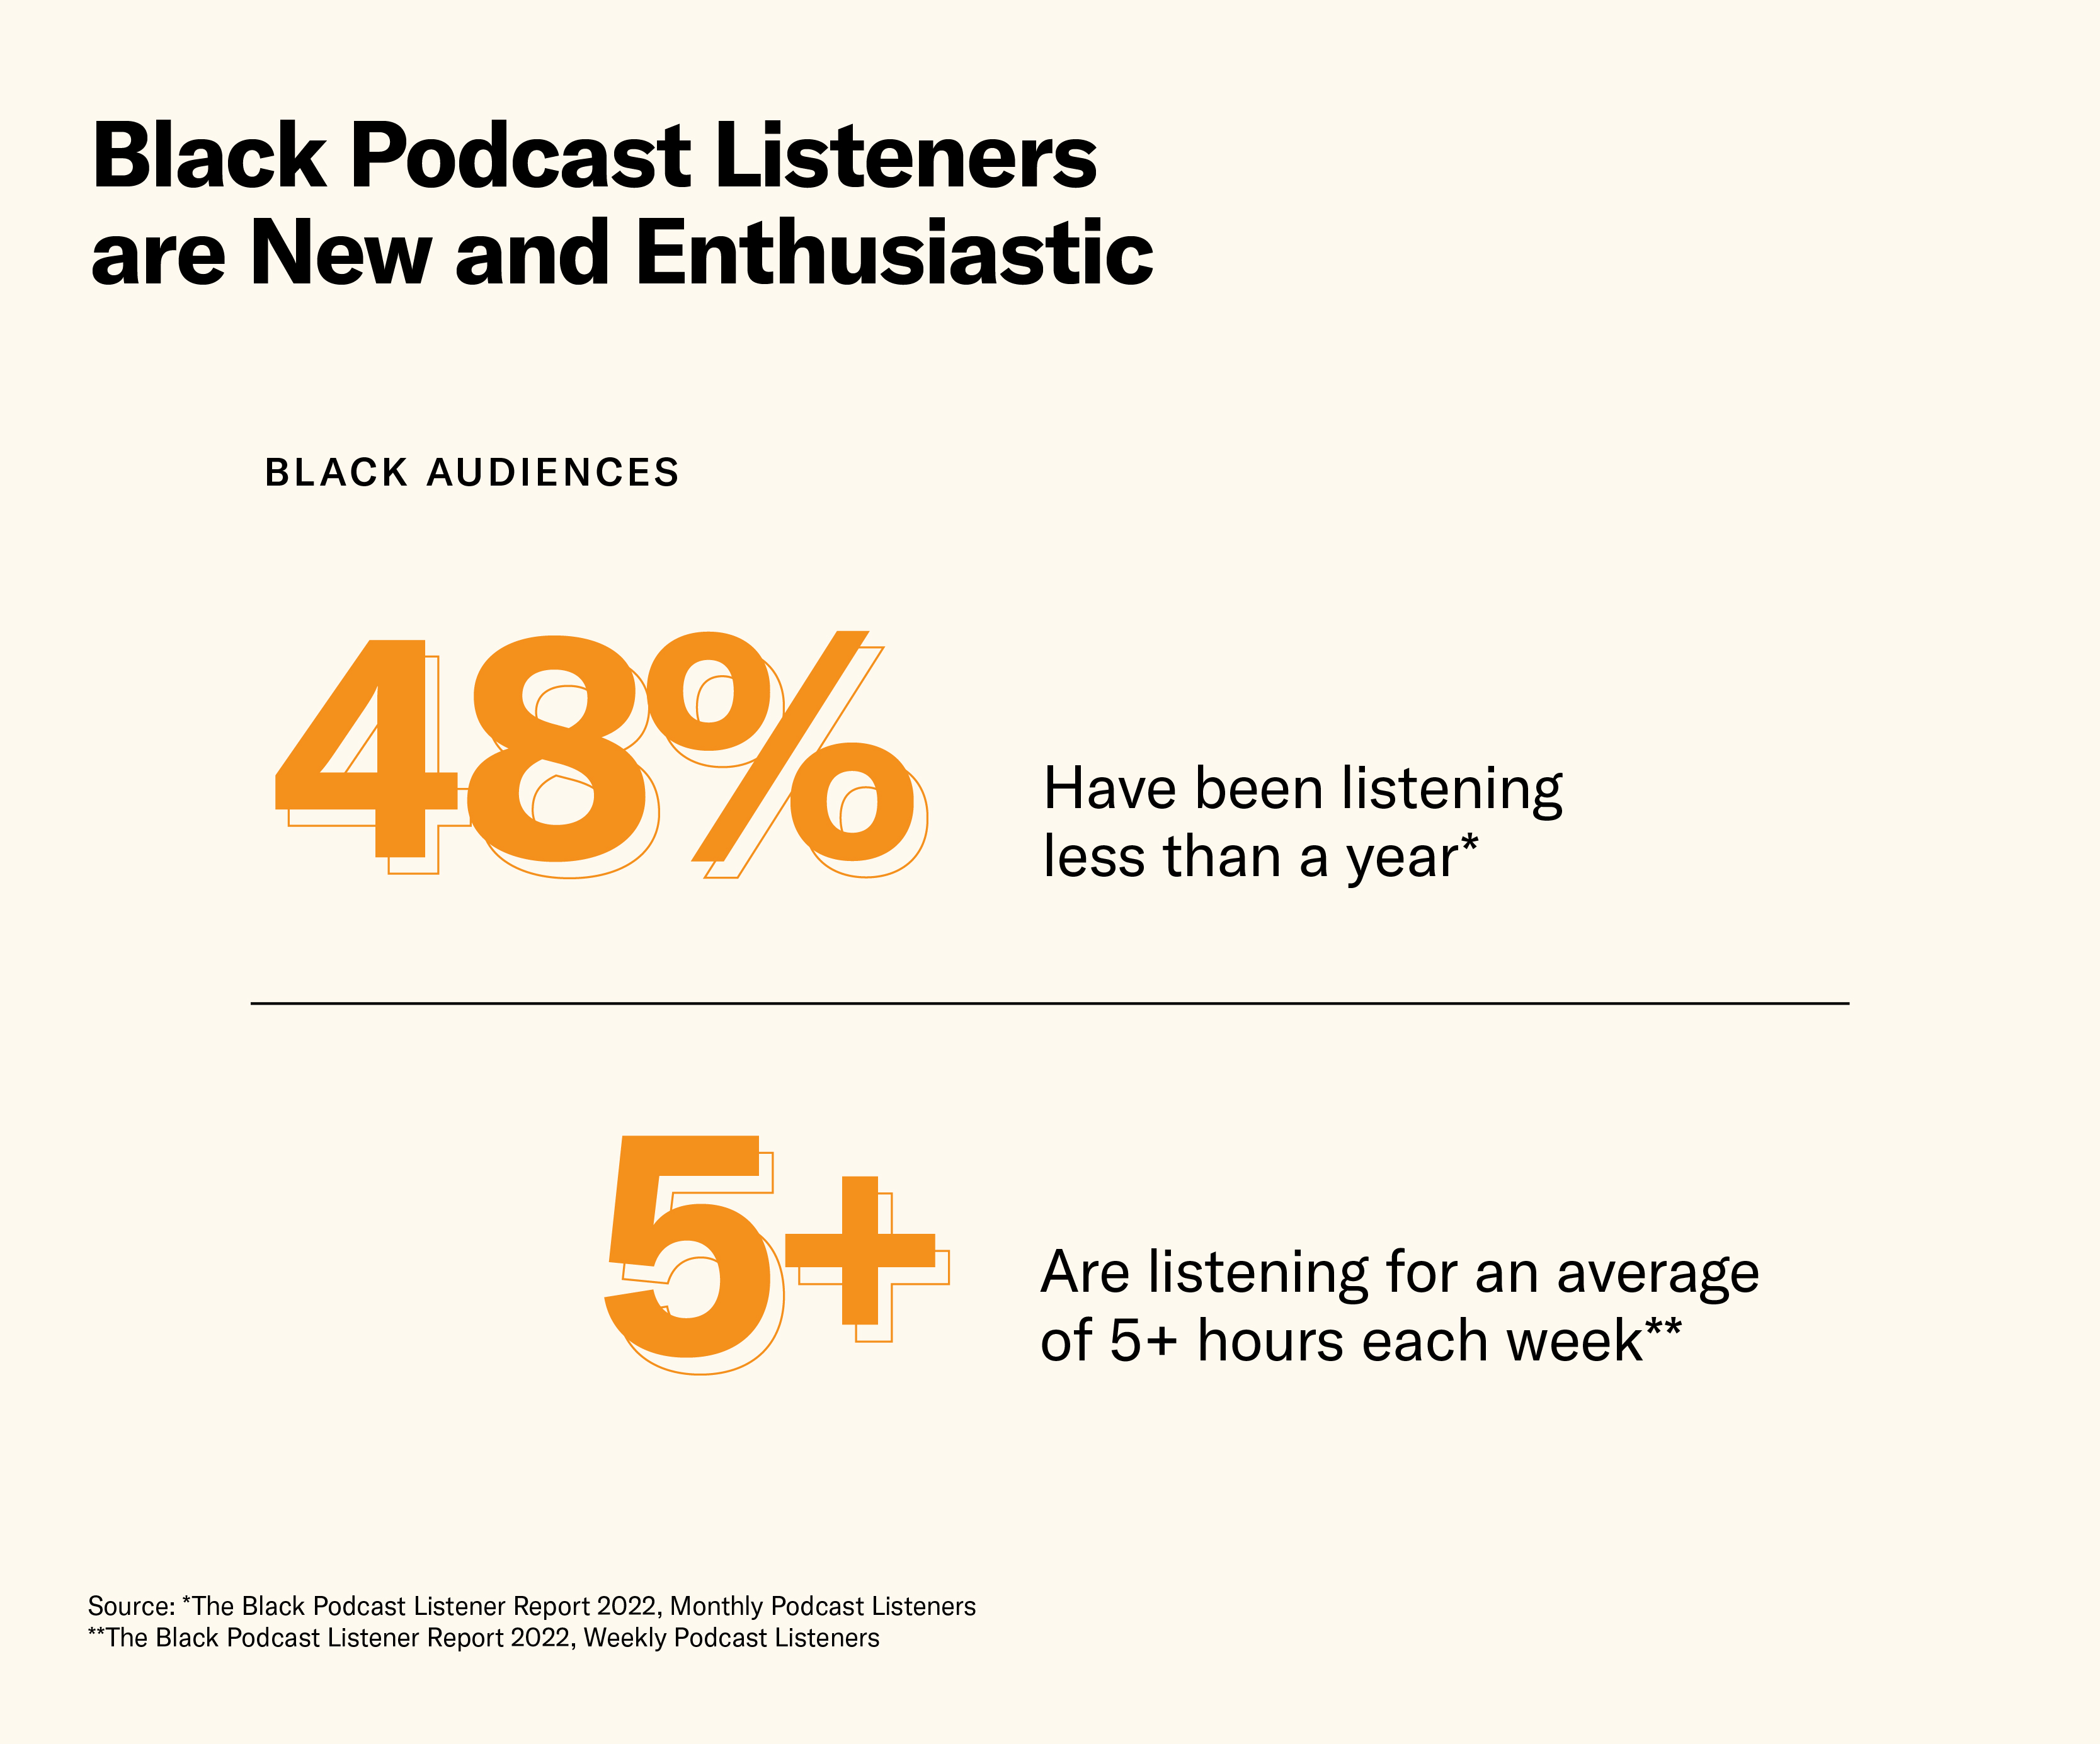 Black Podcast Listeners are New and Enthusiastic